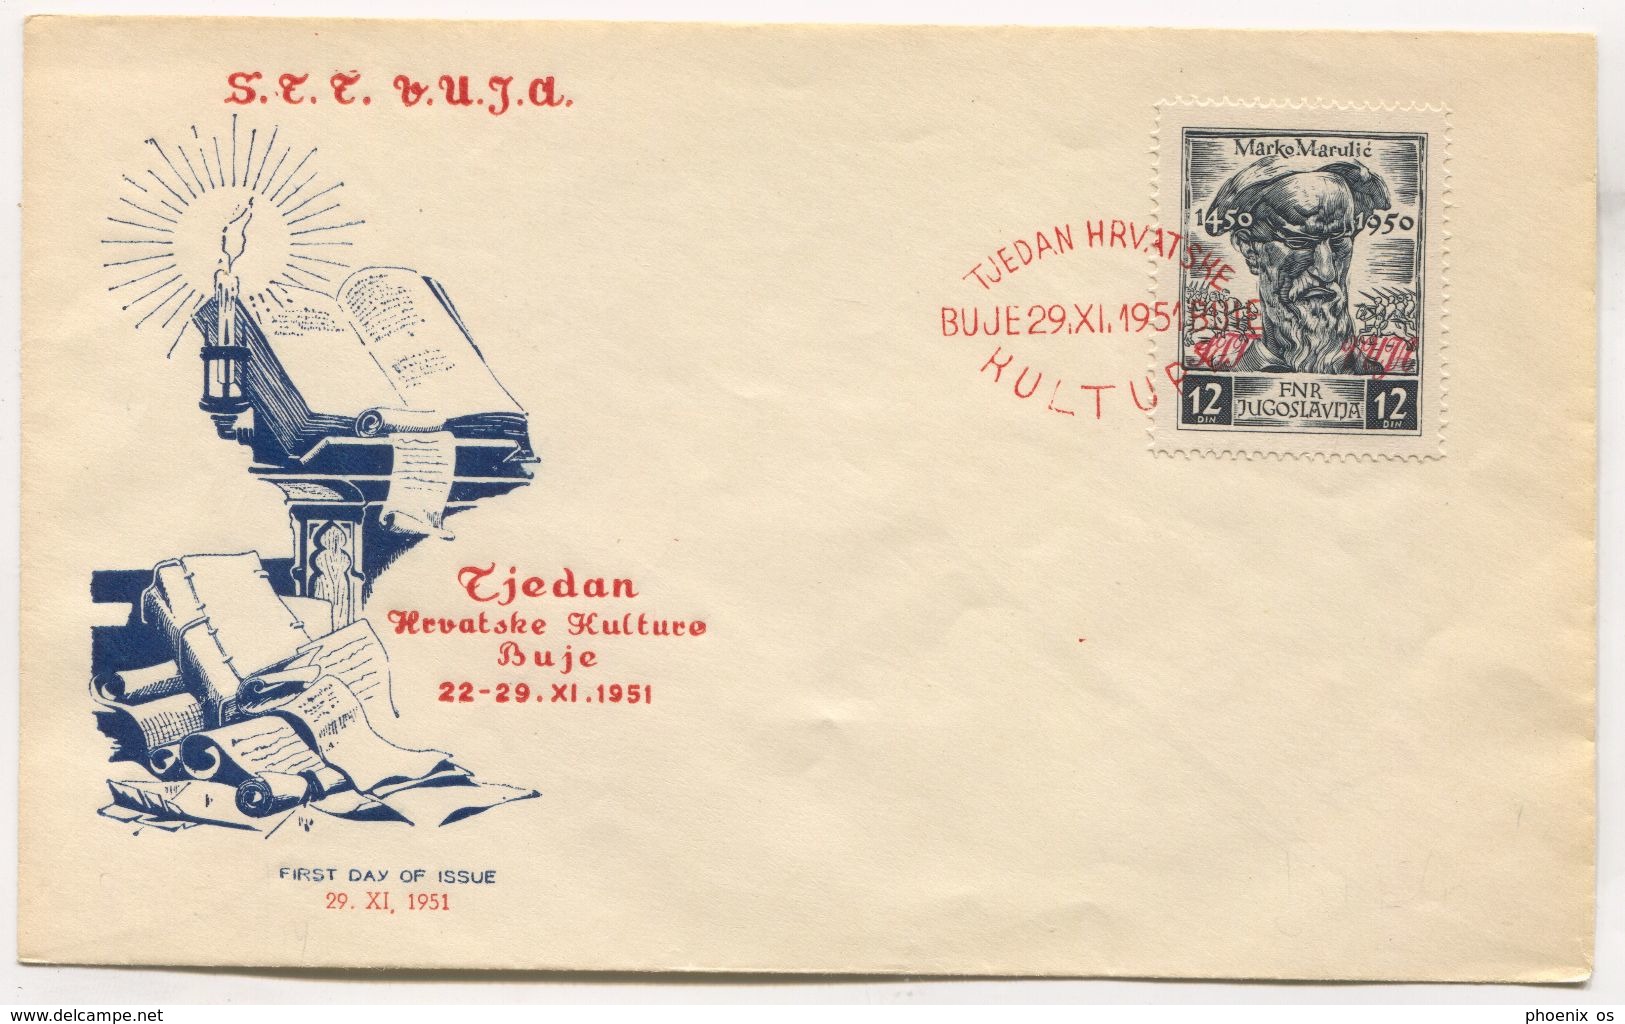 ITALY 1951. STT VUJA / FDC COVER, BUJE / BUIE, ISTRA ISTRIA - Marcophilie